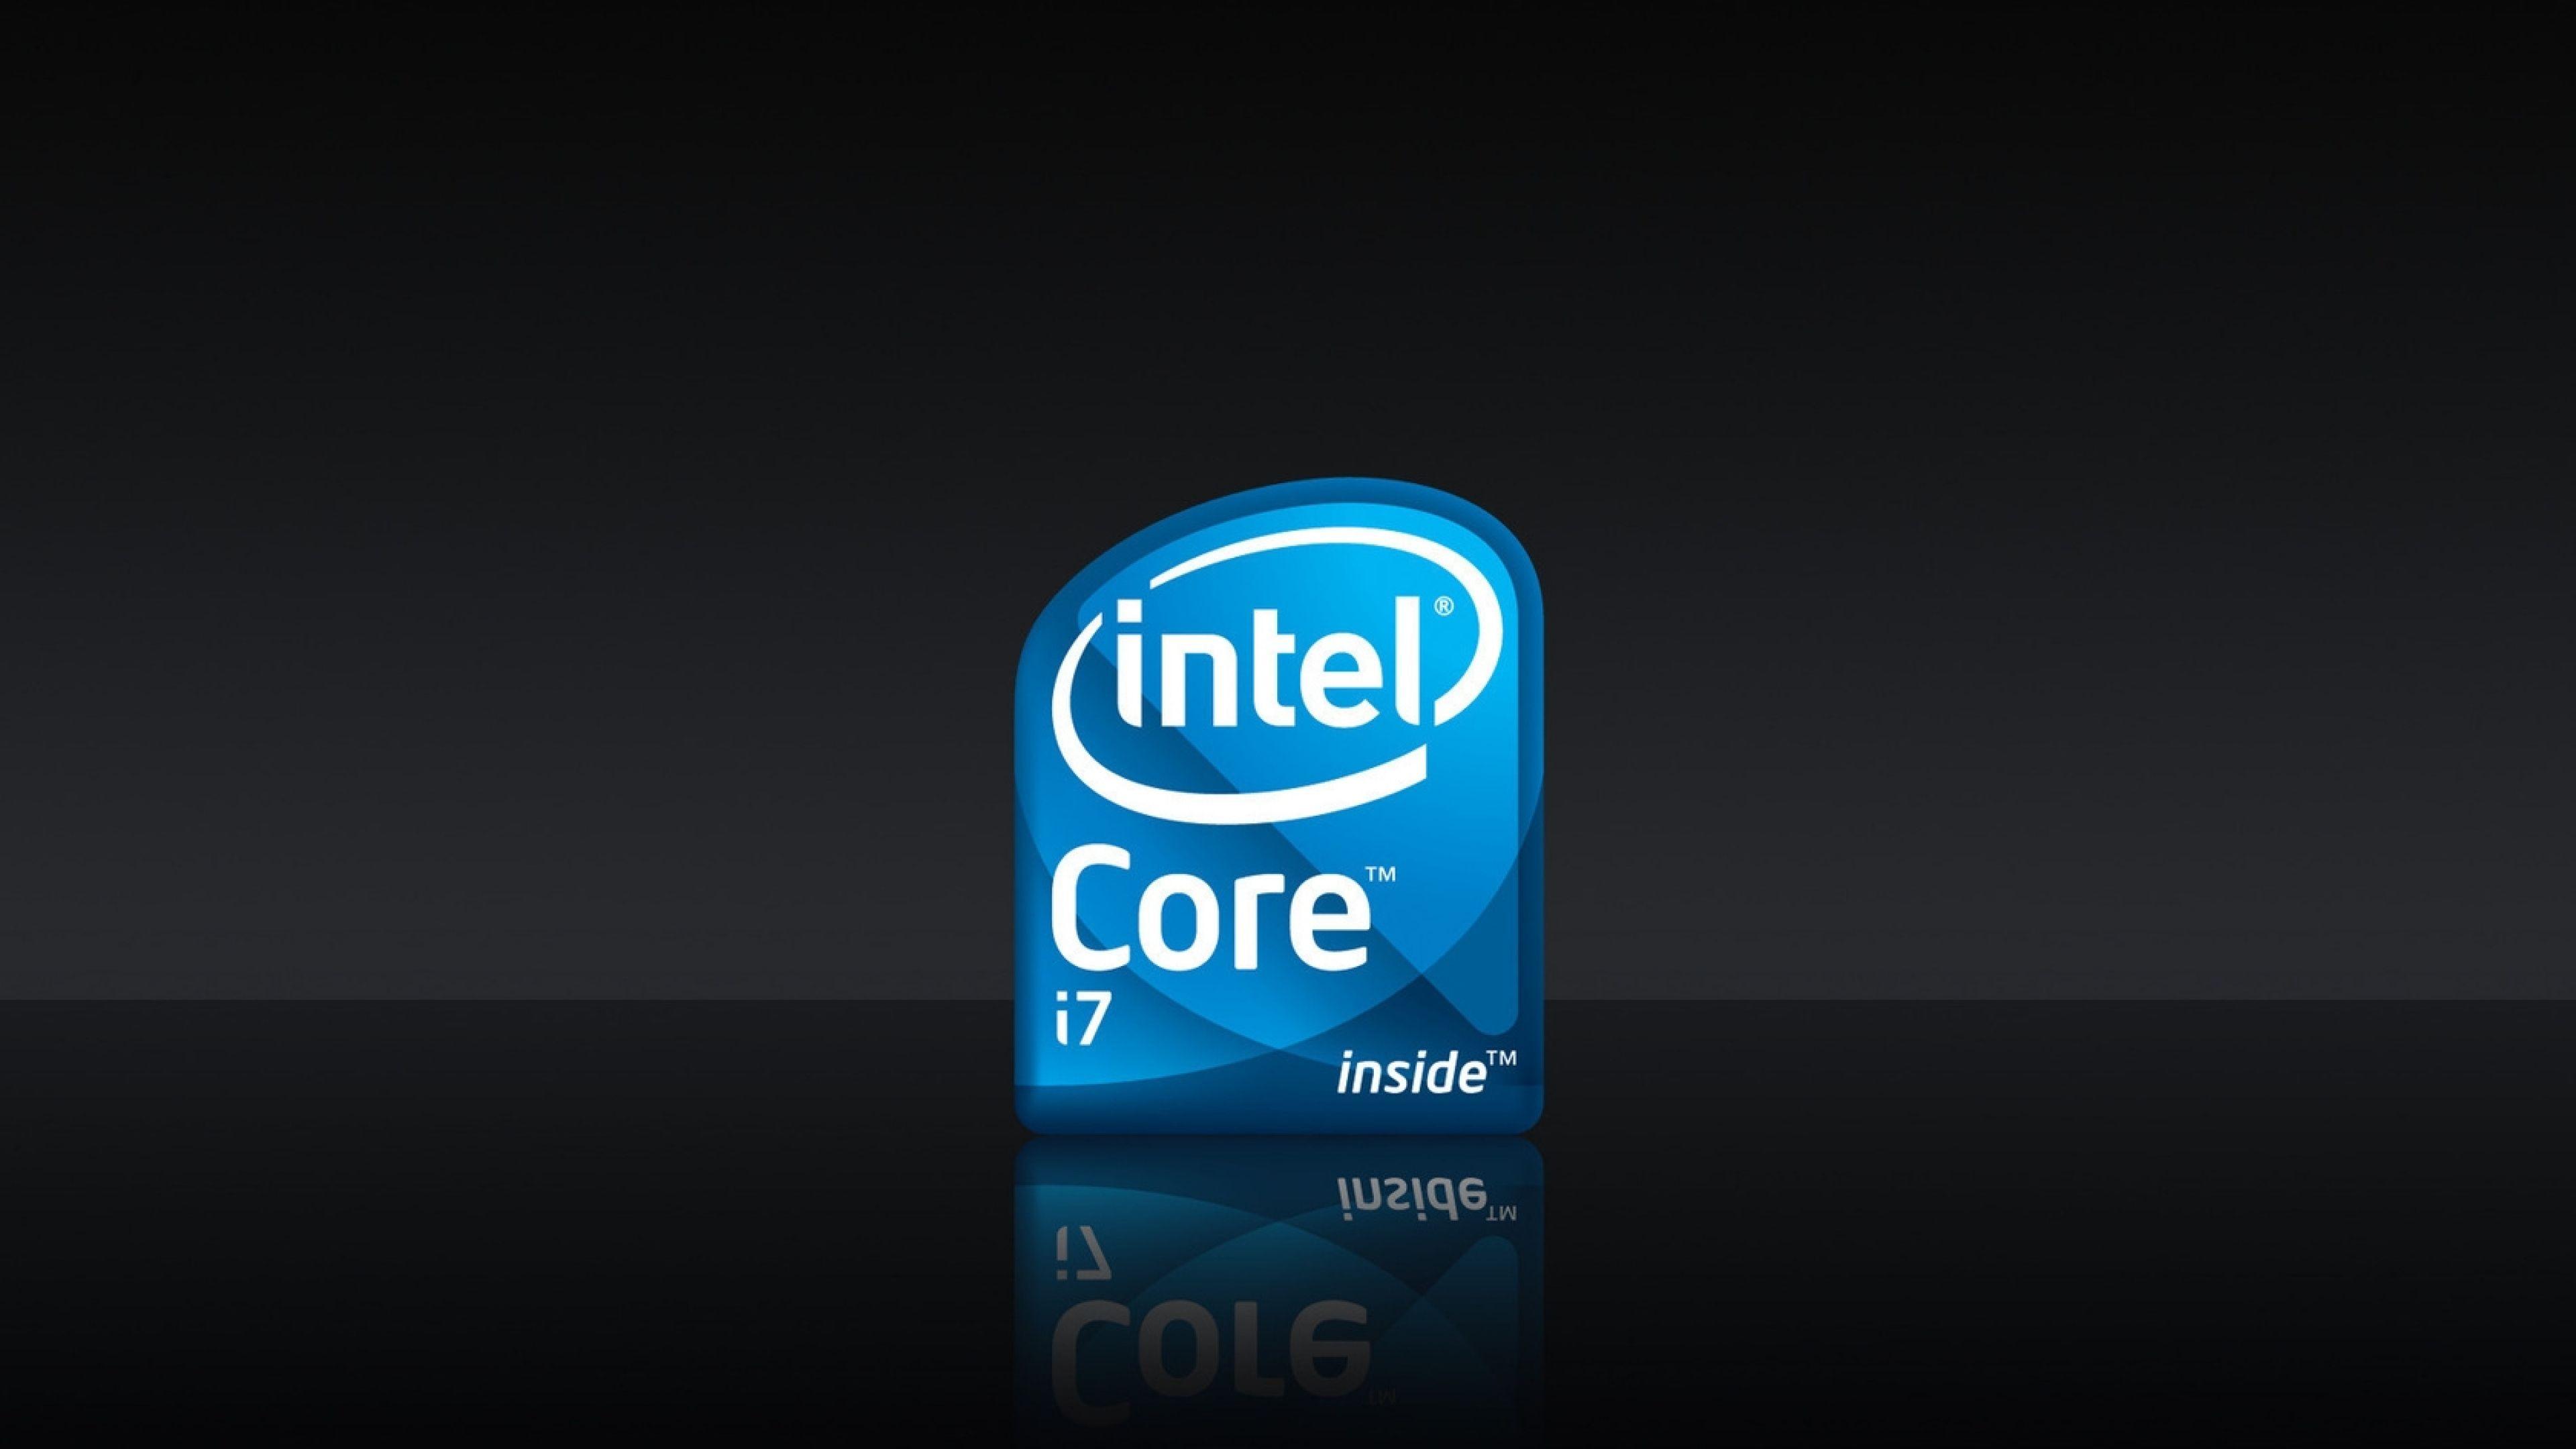 Intel I9 Wallpapers Top Free Intel I9 Backgrounds Wallpaperaccess